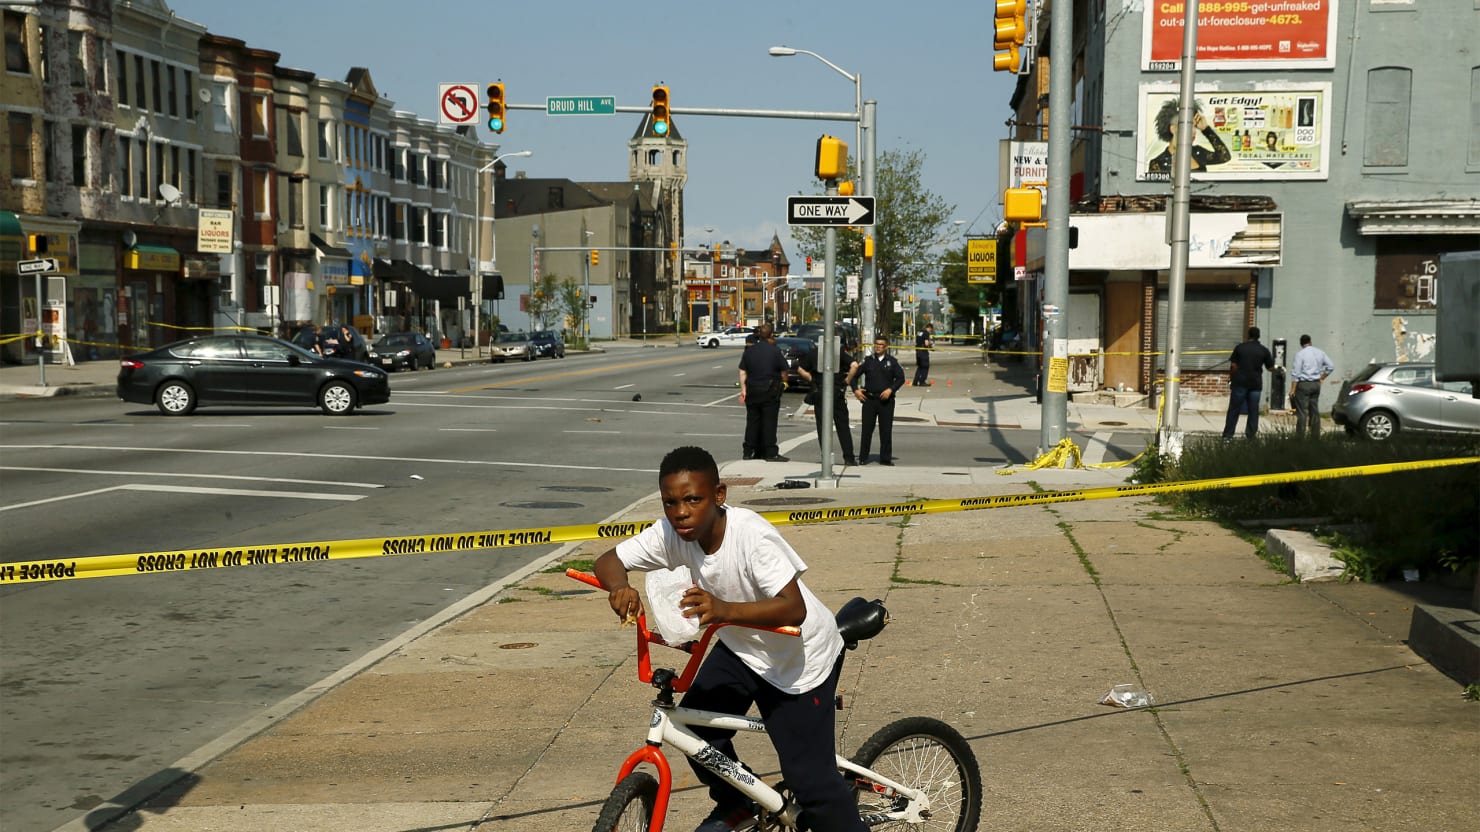 Baltimore Homicides Top 300 in 2015